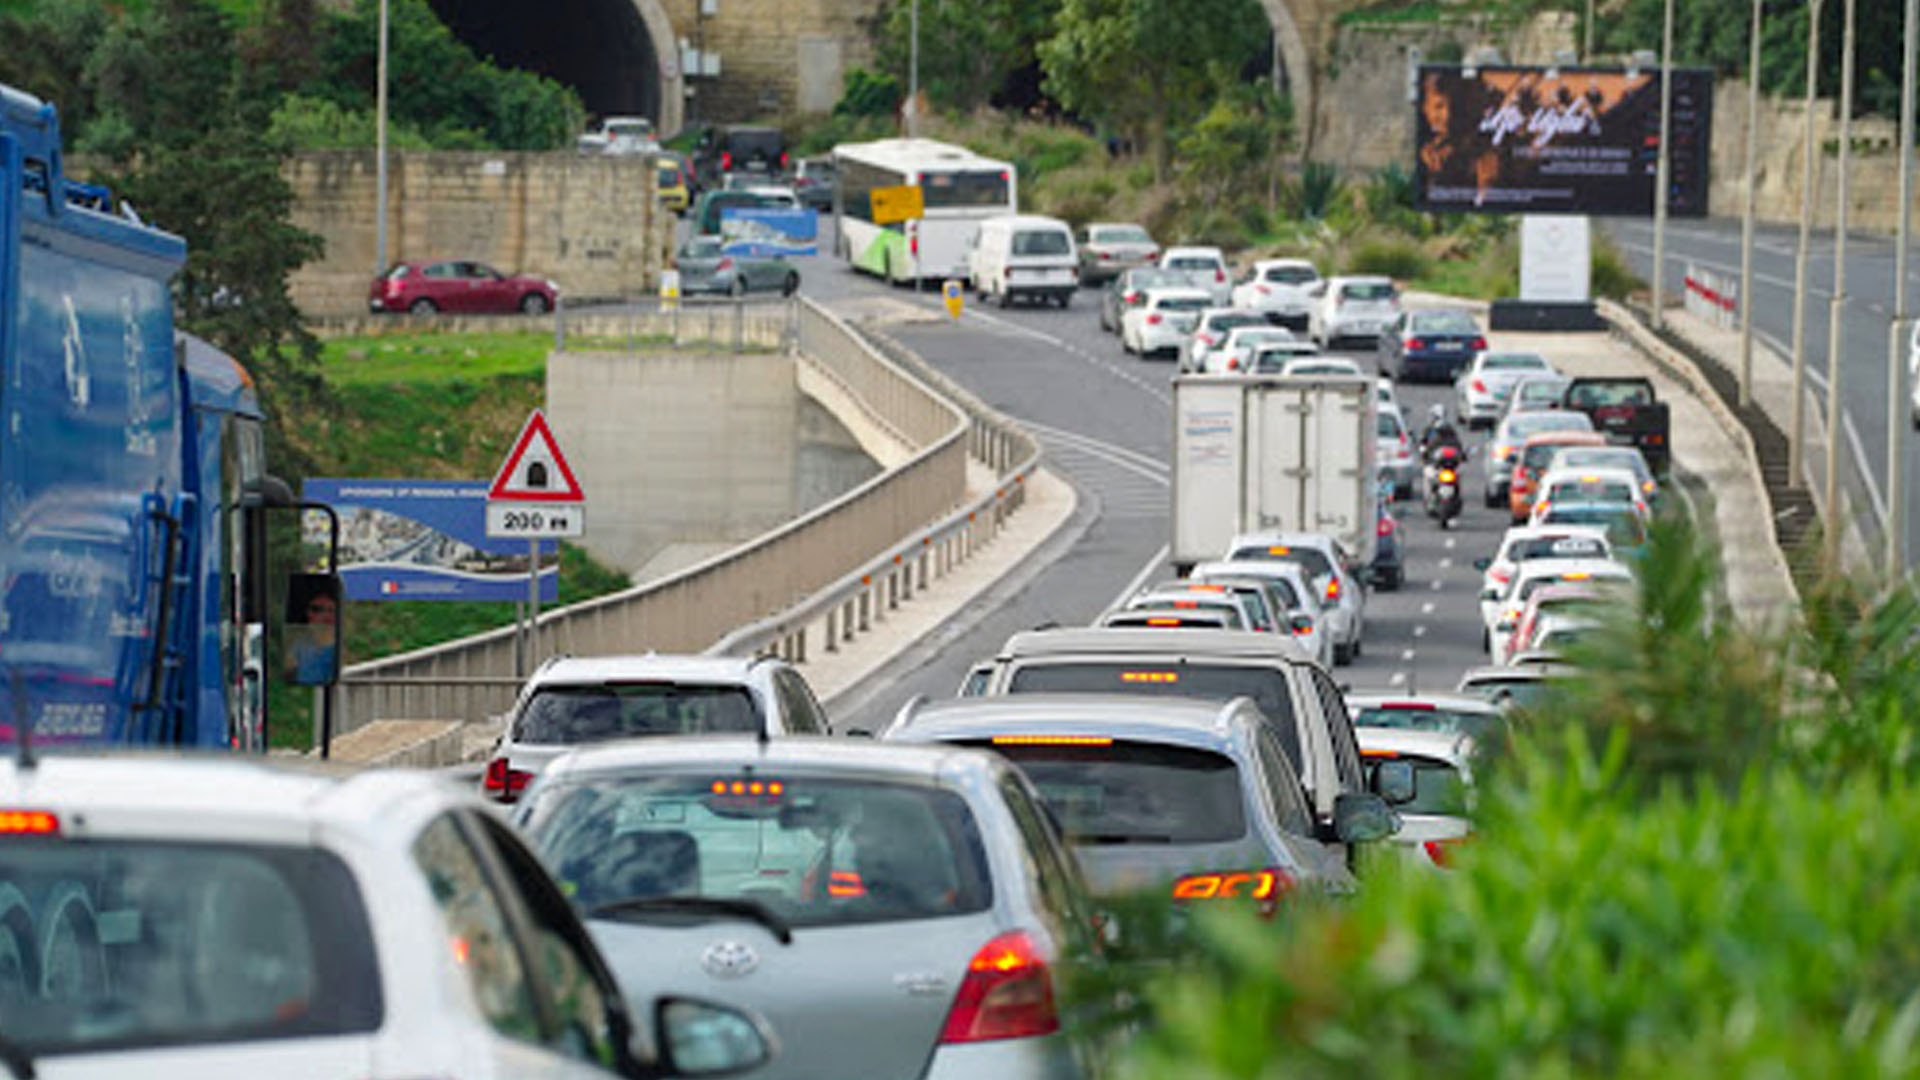 Licensed vehicles in Malta increase by 21 daily